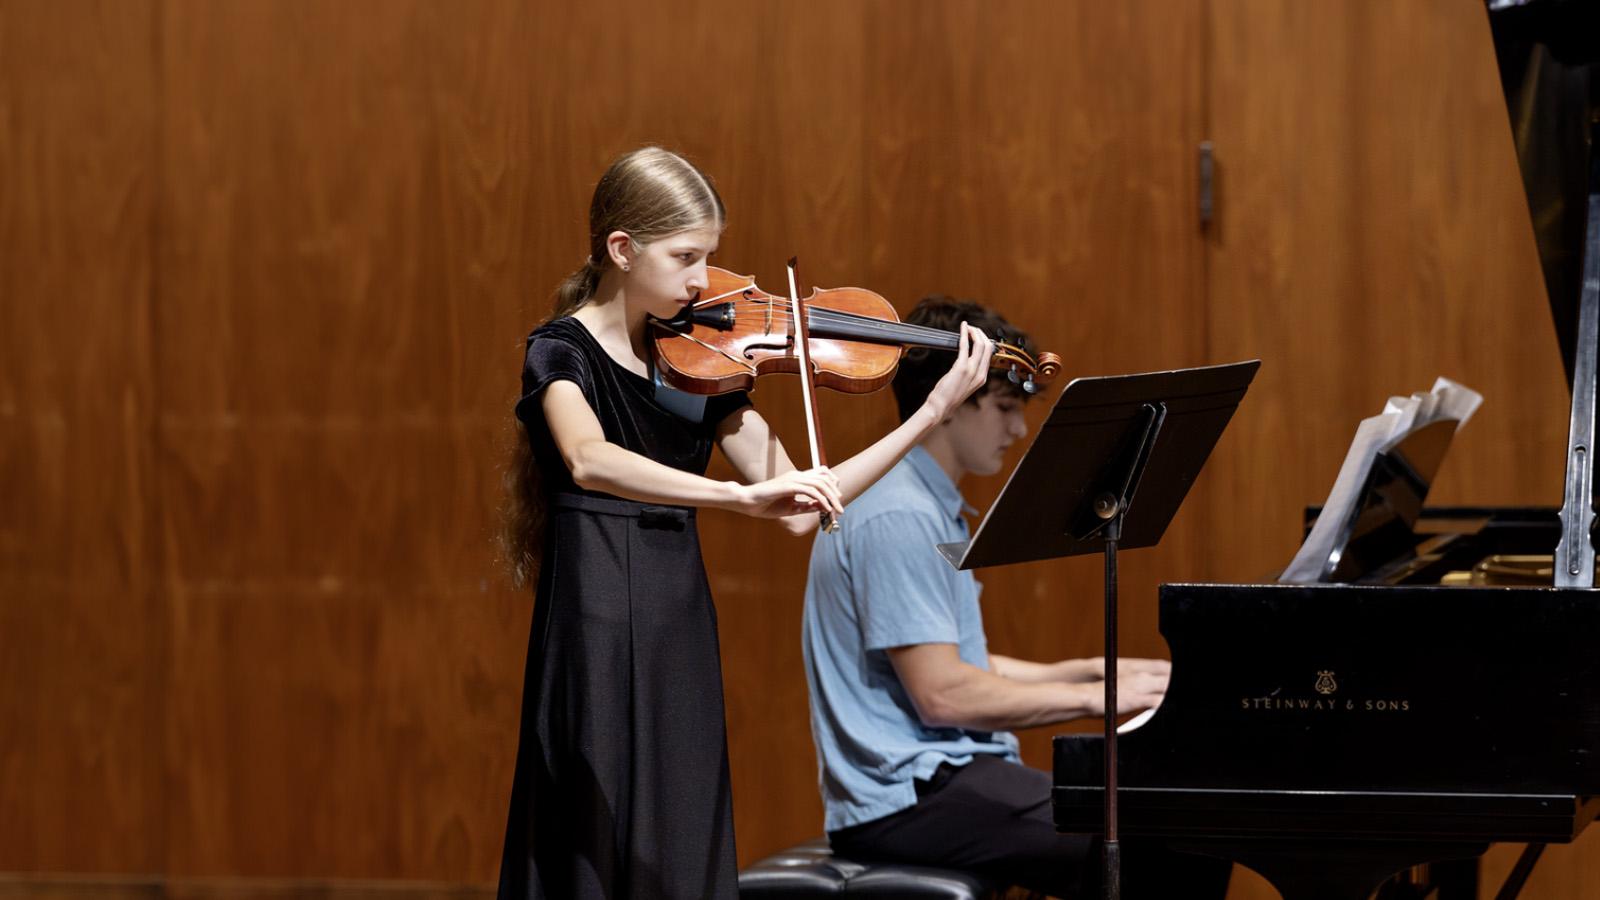 High school students Naomi Peel and Bodhi Pavlik perform on violin and piano at Lawrence University.